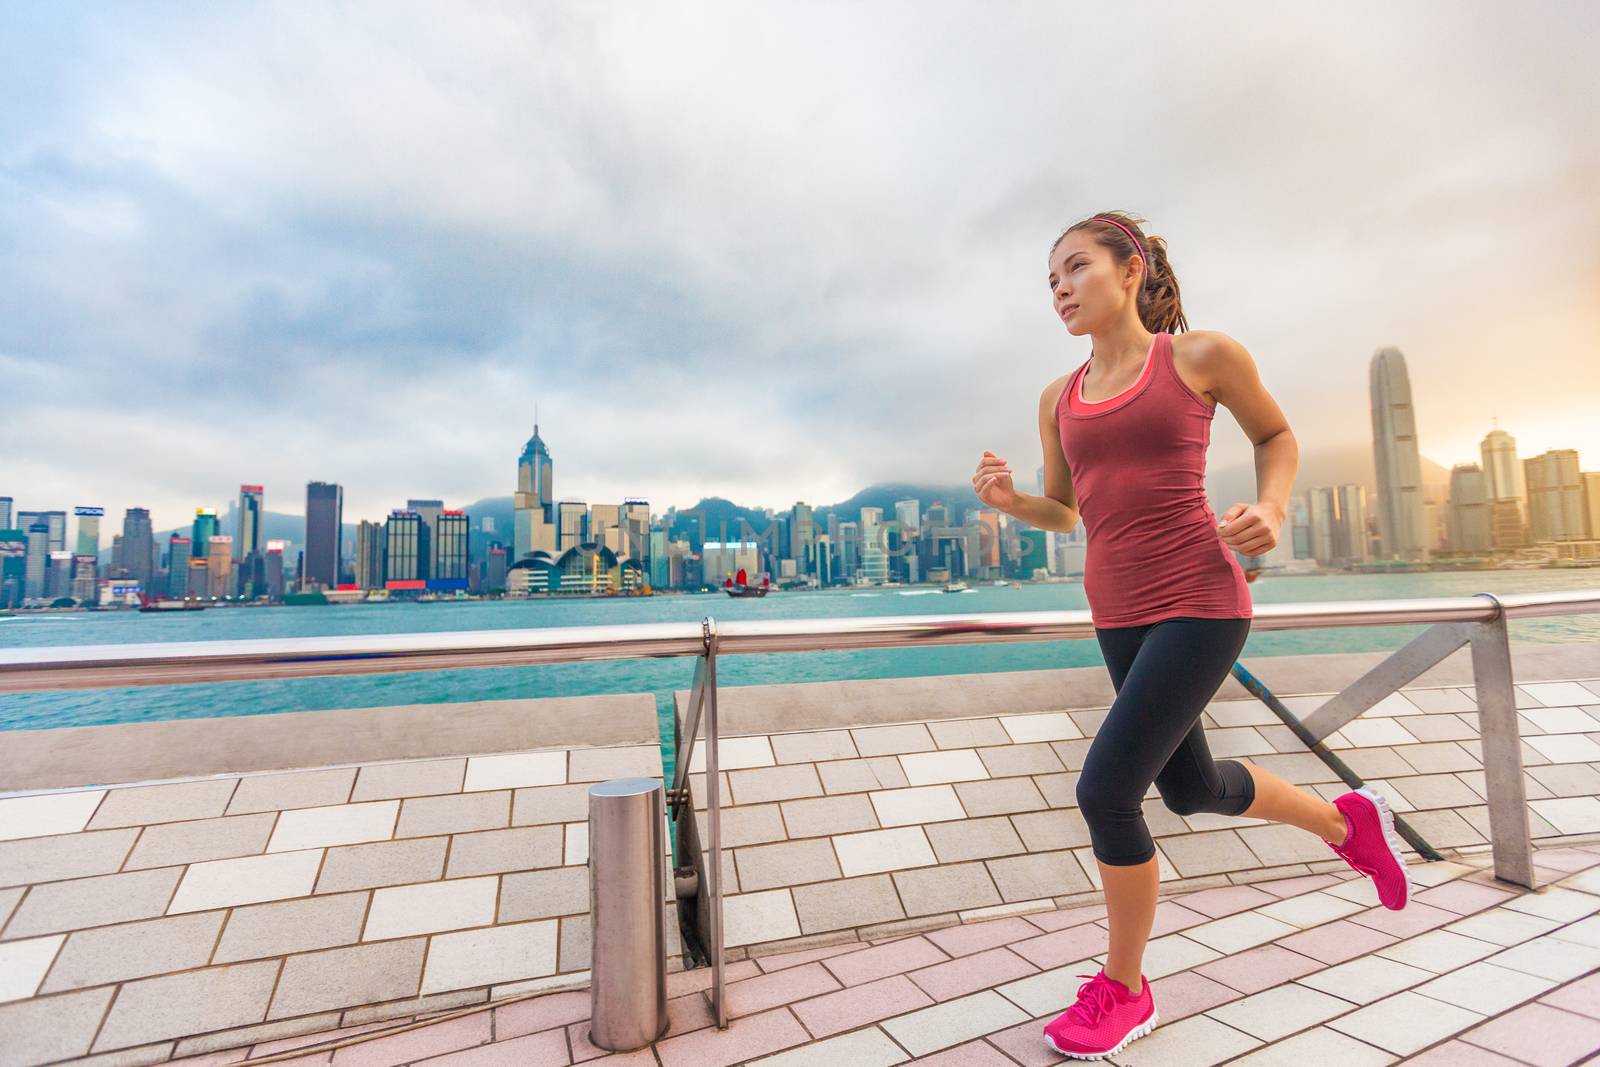 City Running - woman runner and Hong Kong skyline. Female athlete fitness athlete jogging training living healthy lifestyle on Tsim Sha Tsui Promenade and Avenue of Stars in Victoria Harbour, Kowloon.